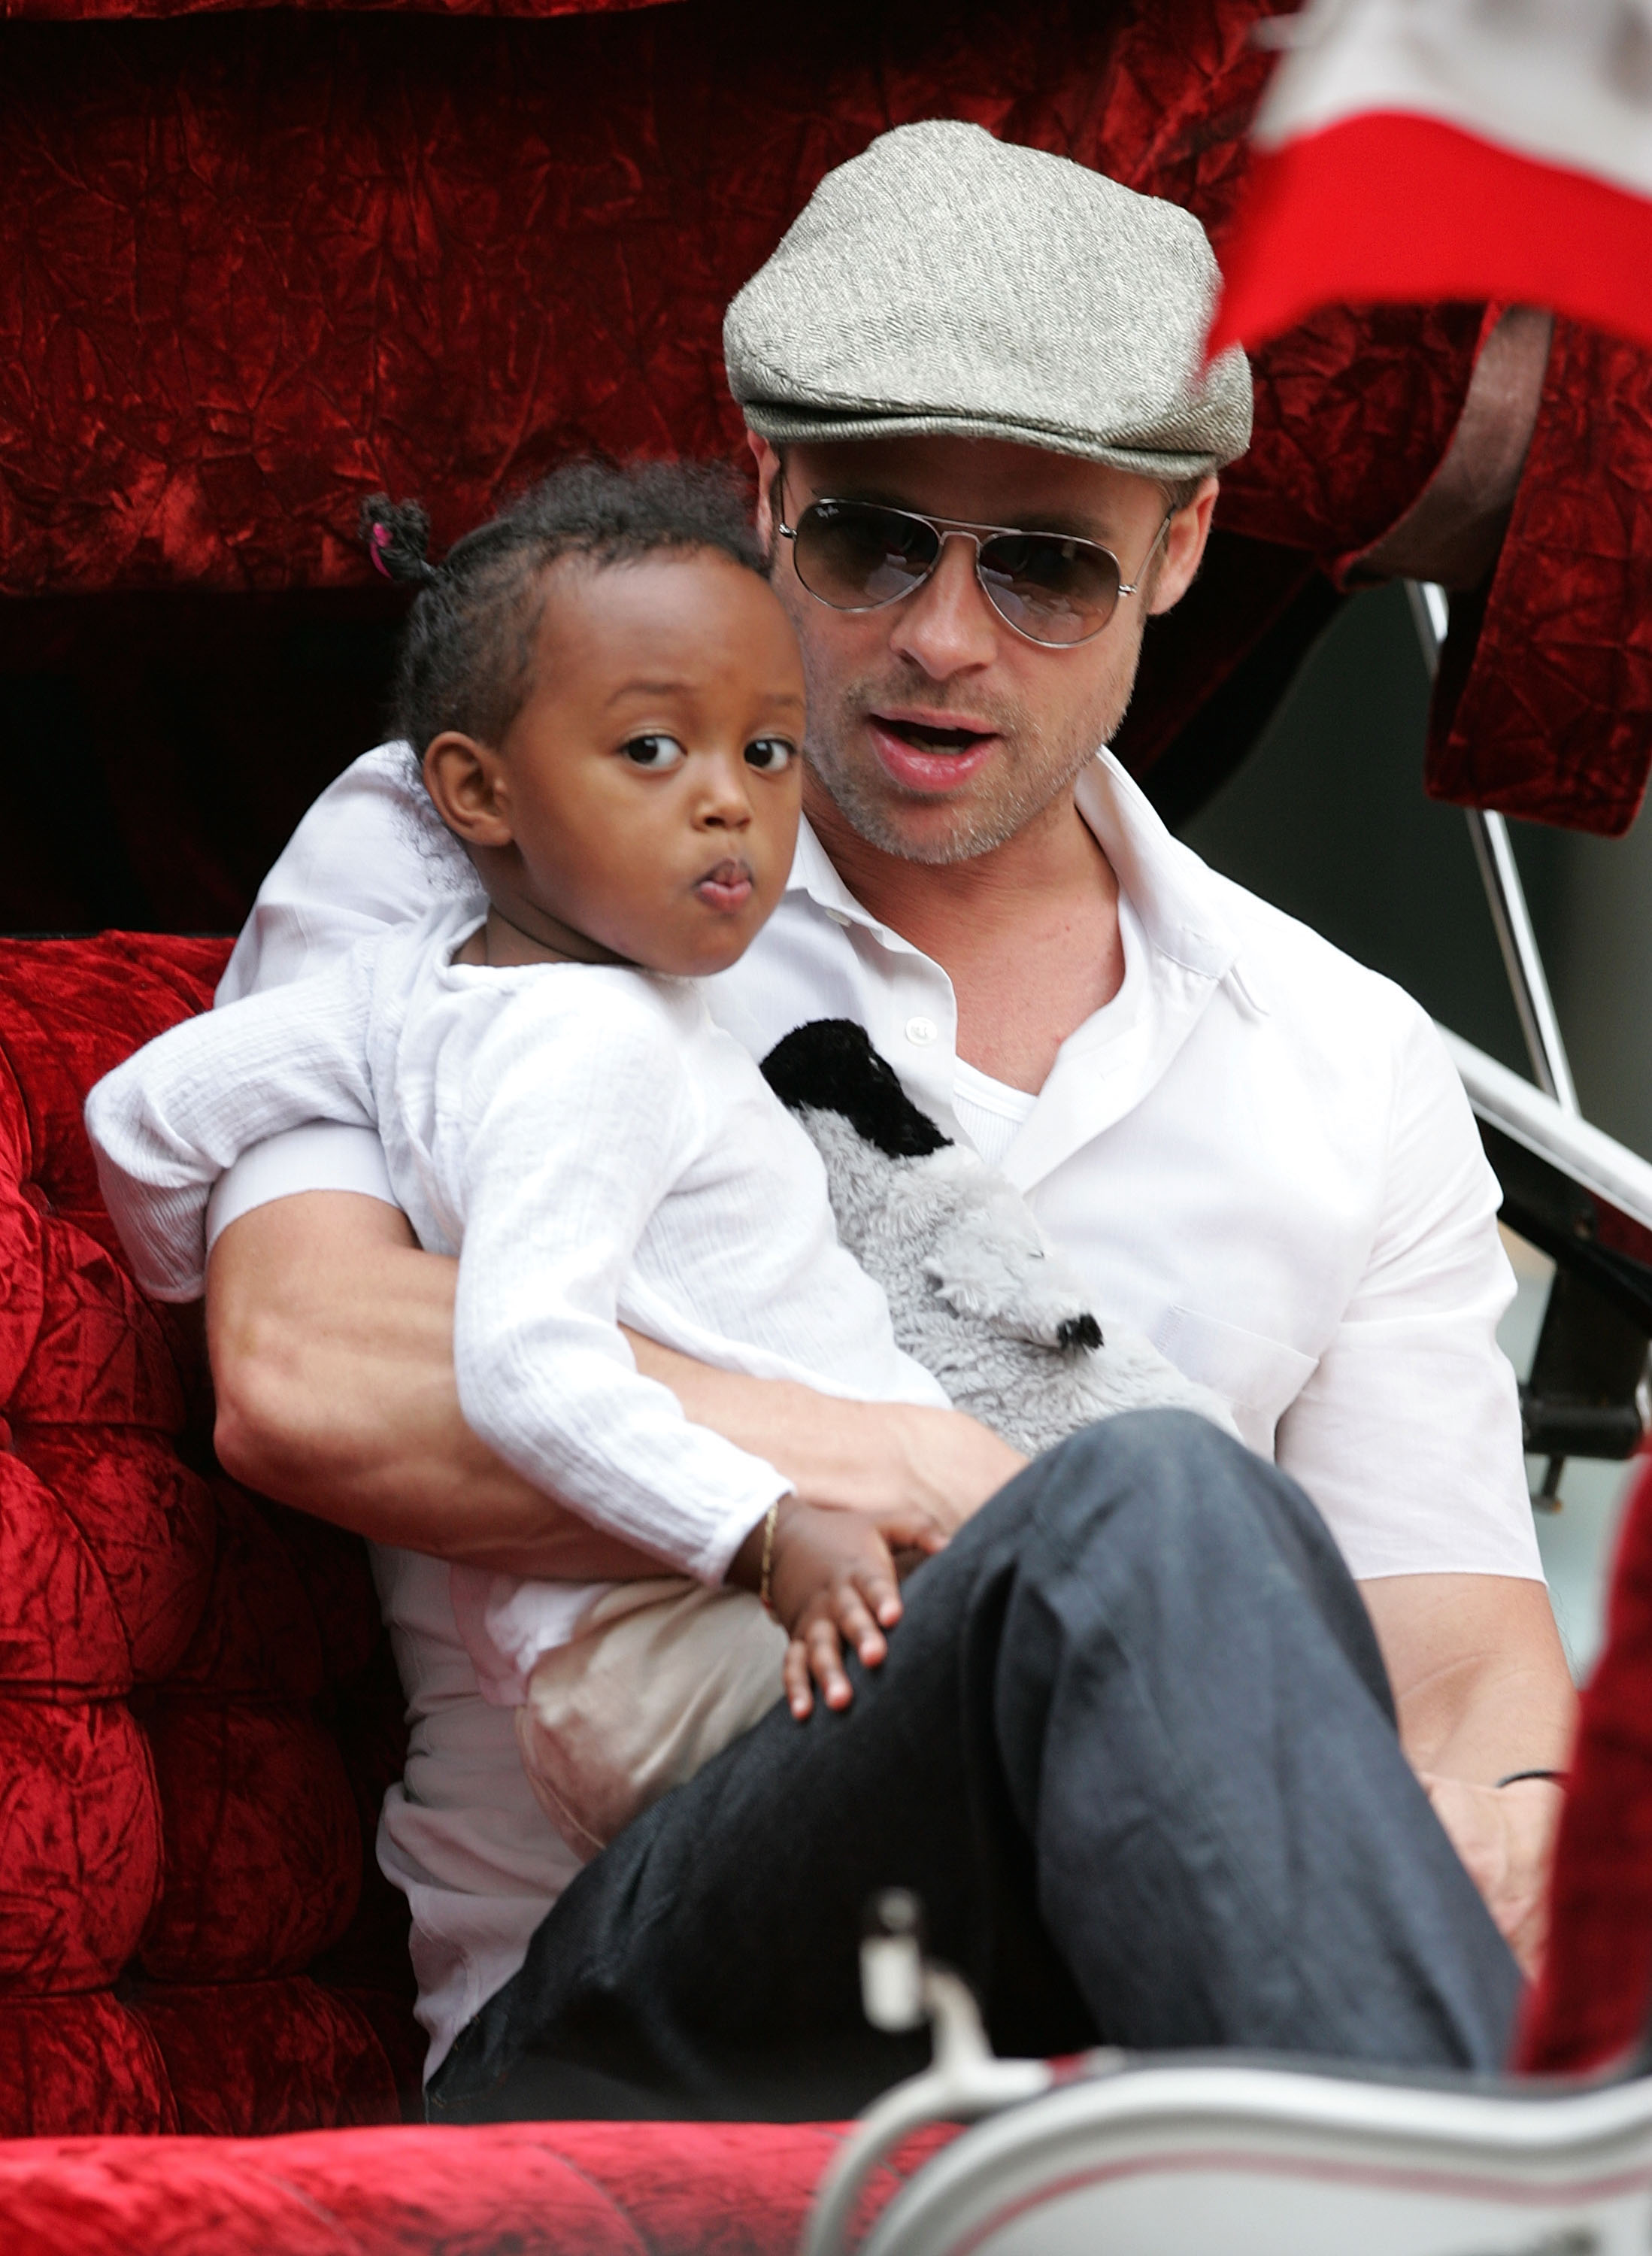 Brad Pitt and the girl visit Central Park in New York City on August 28, 2007. | Source: Getty Images